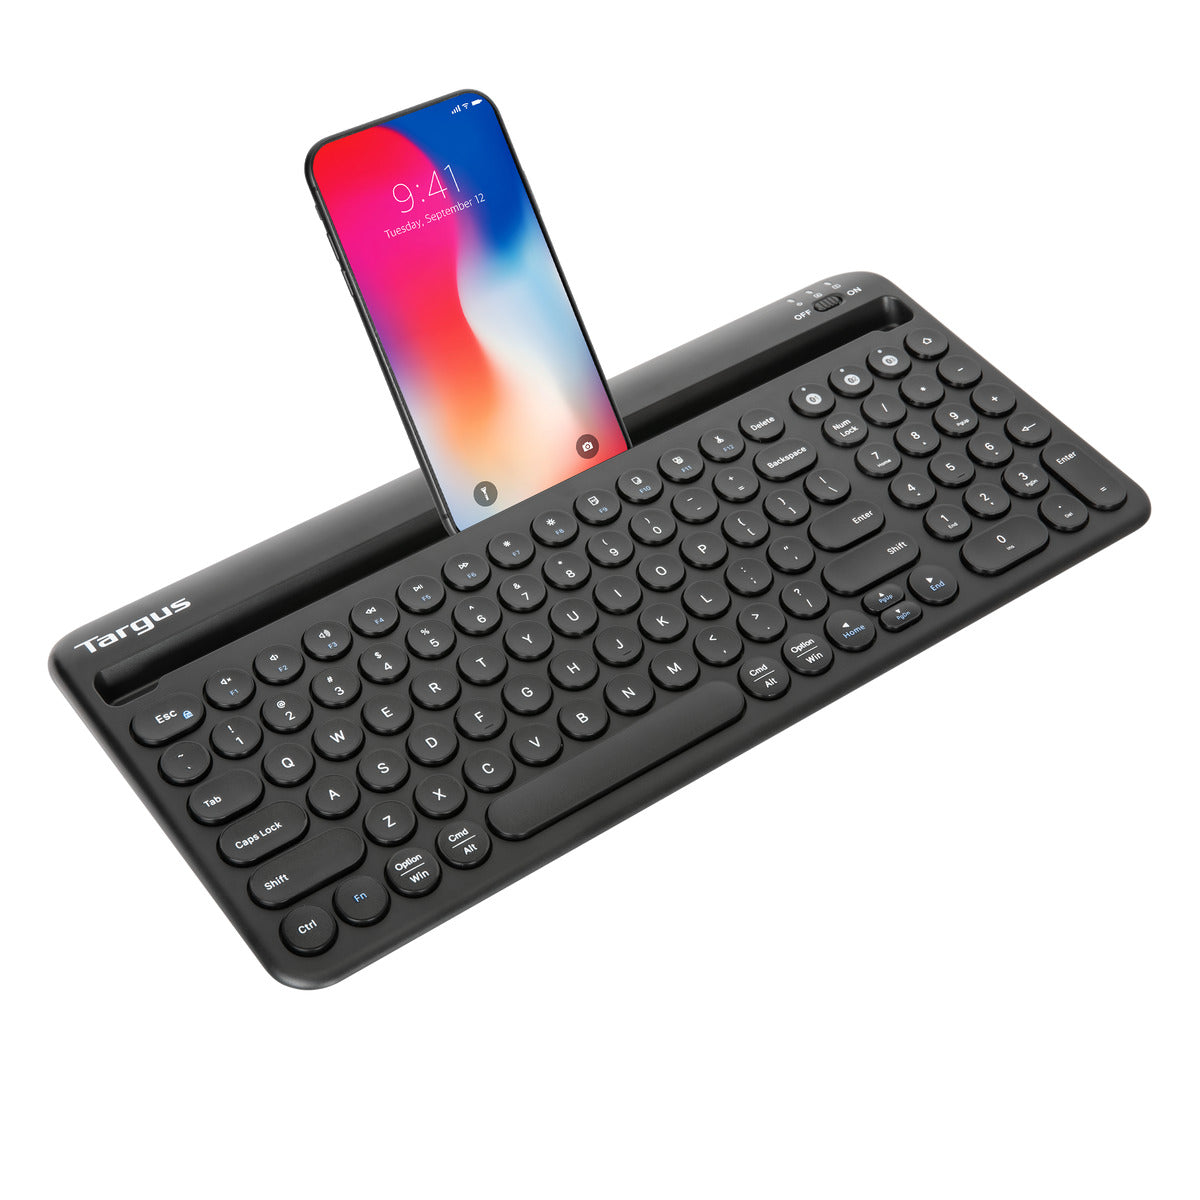 Targus AKB867 Multi-Device Bluetooth Antimicrobial Keyboard with Tablet/Phone Cradle